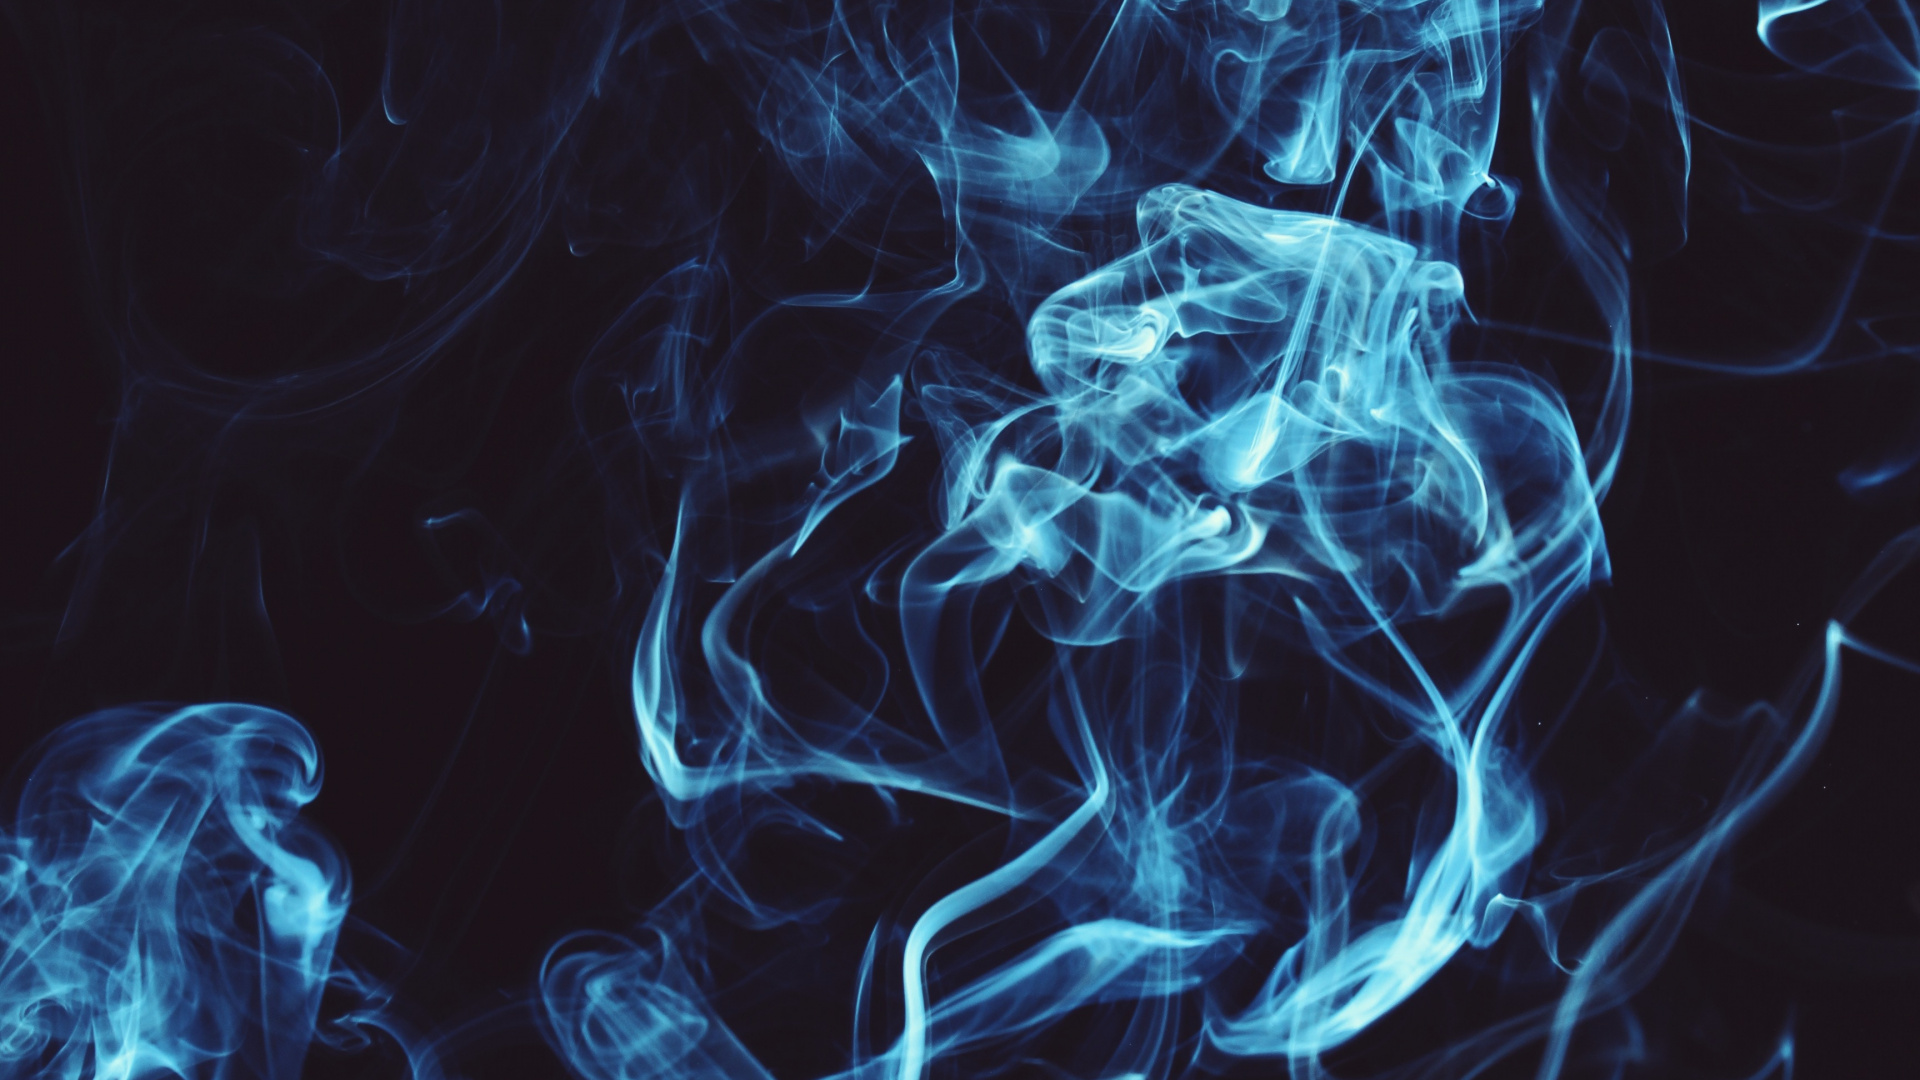 Blue and White Smoke Illustration. Wallpaper in 1920x1080 Resolution